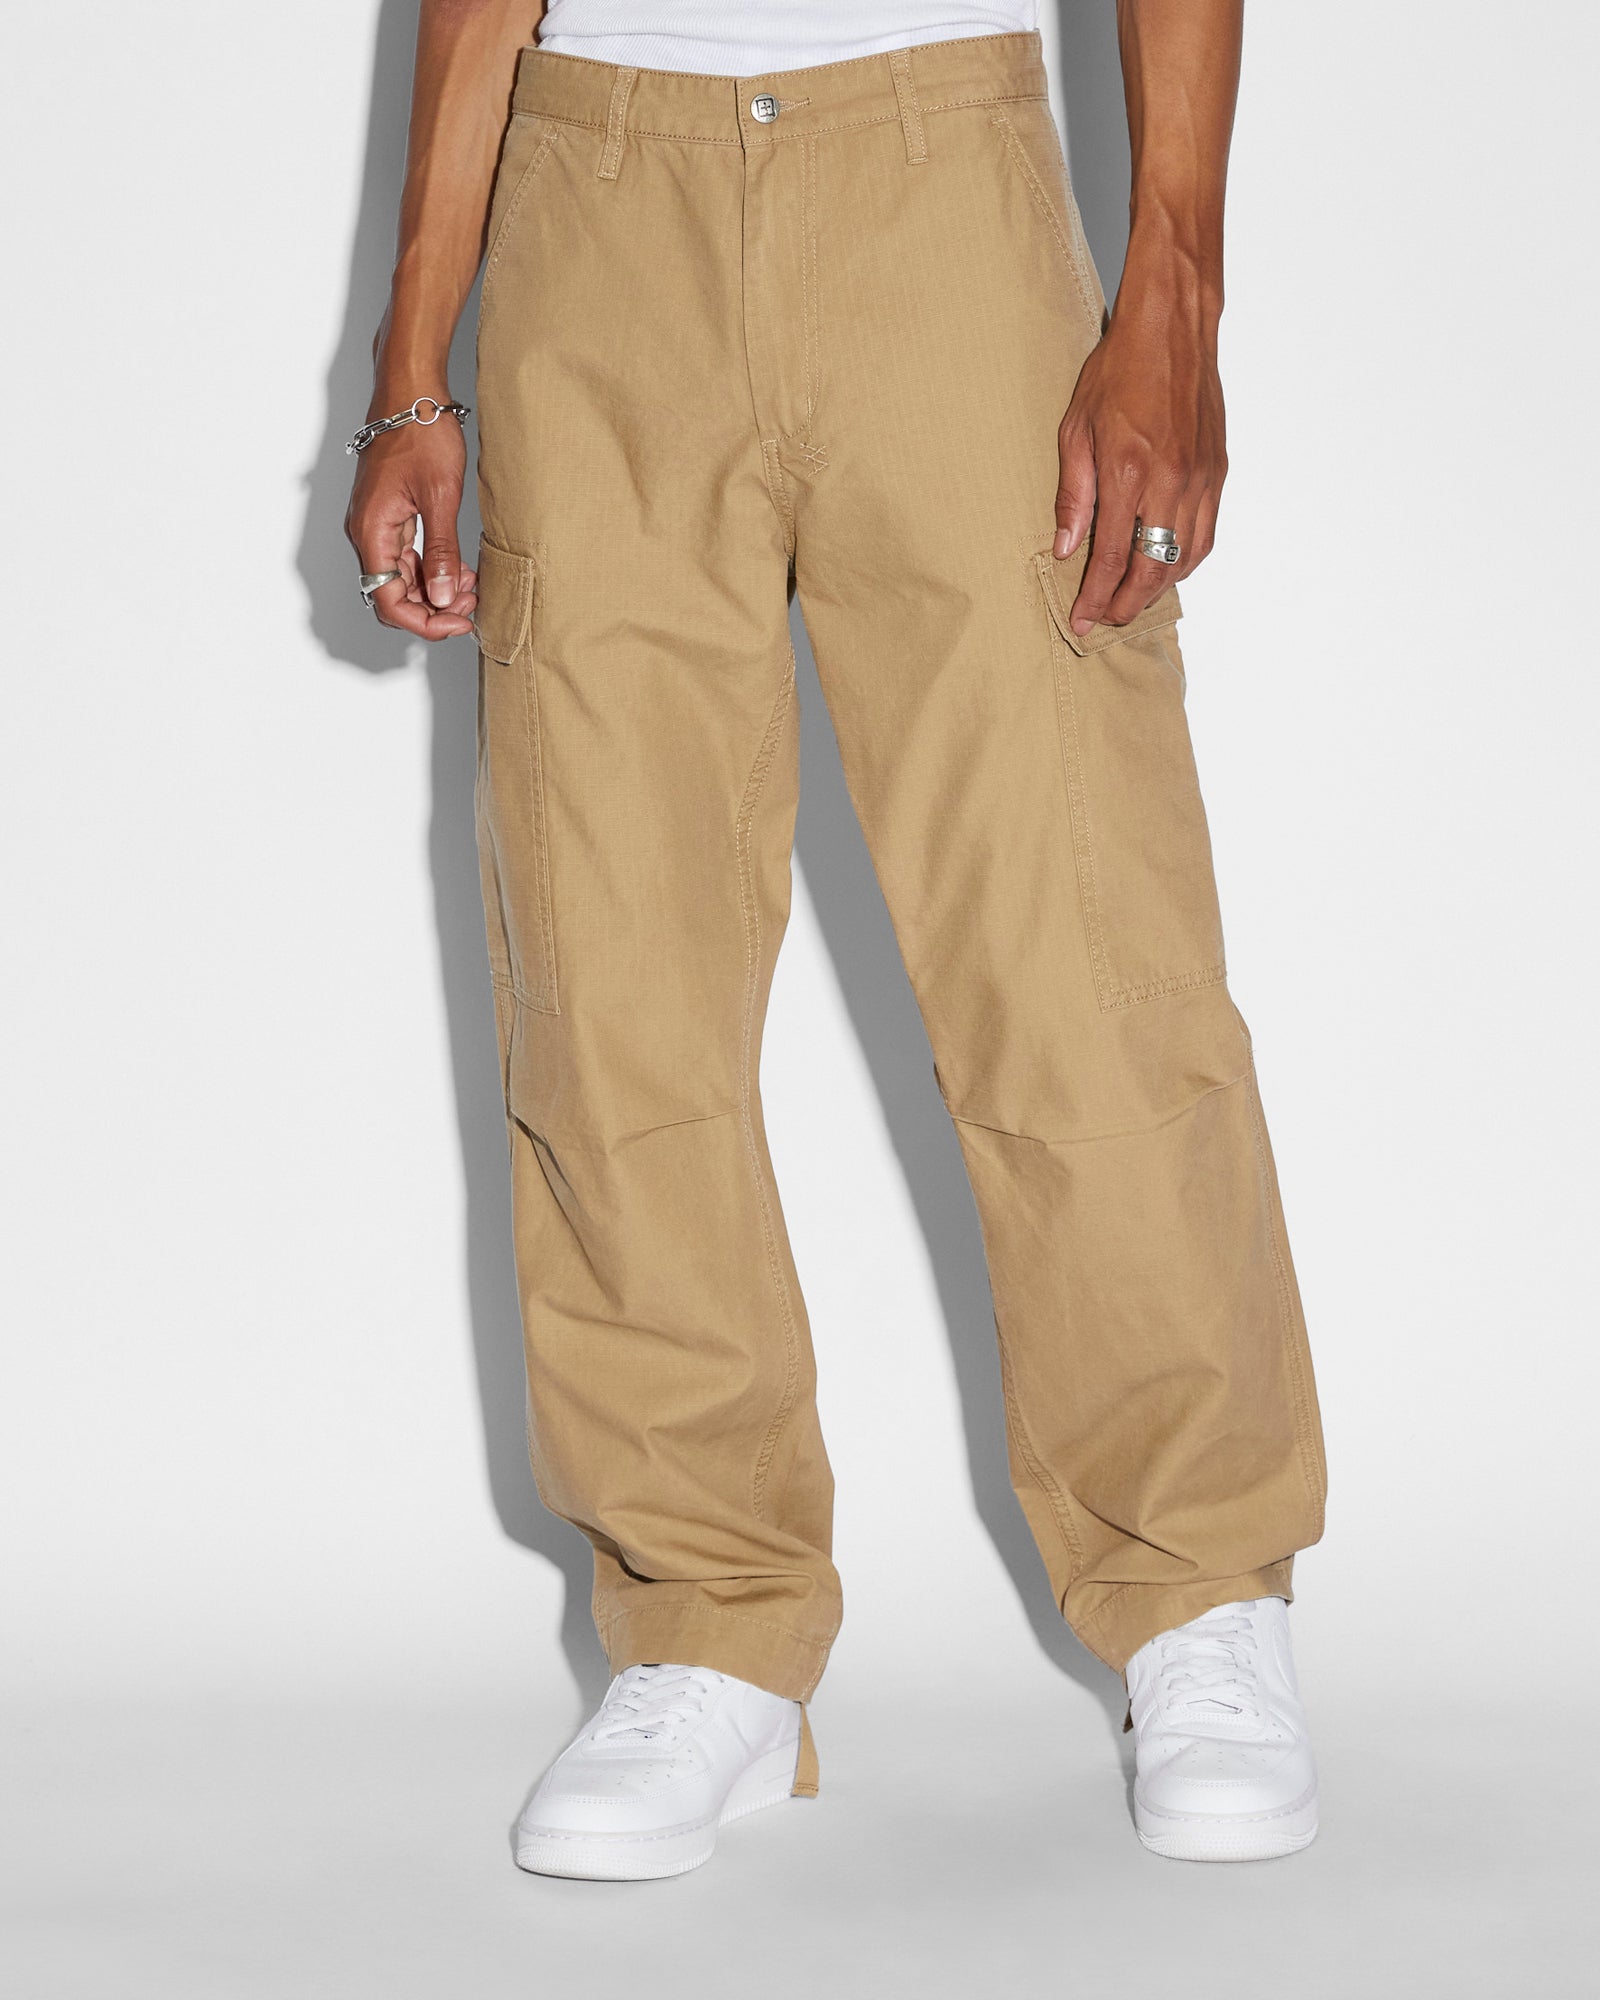 Men's cotton cargo joggers pant Manufacturer, Supplier in New